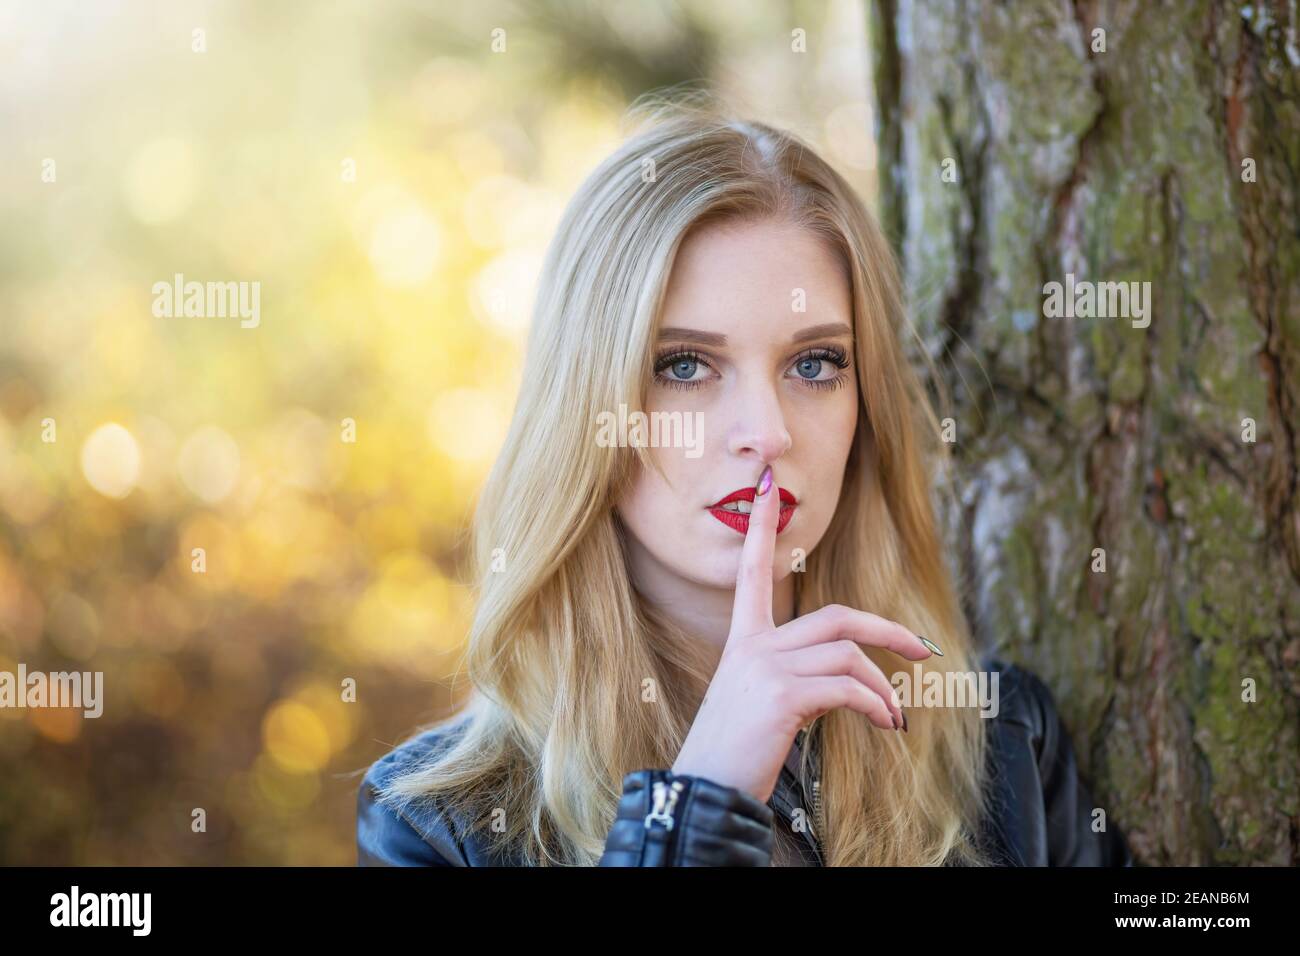 Attractive long hair girl is gesturing Shhh posing in autumn park. Horizontally. Stock Photo